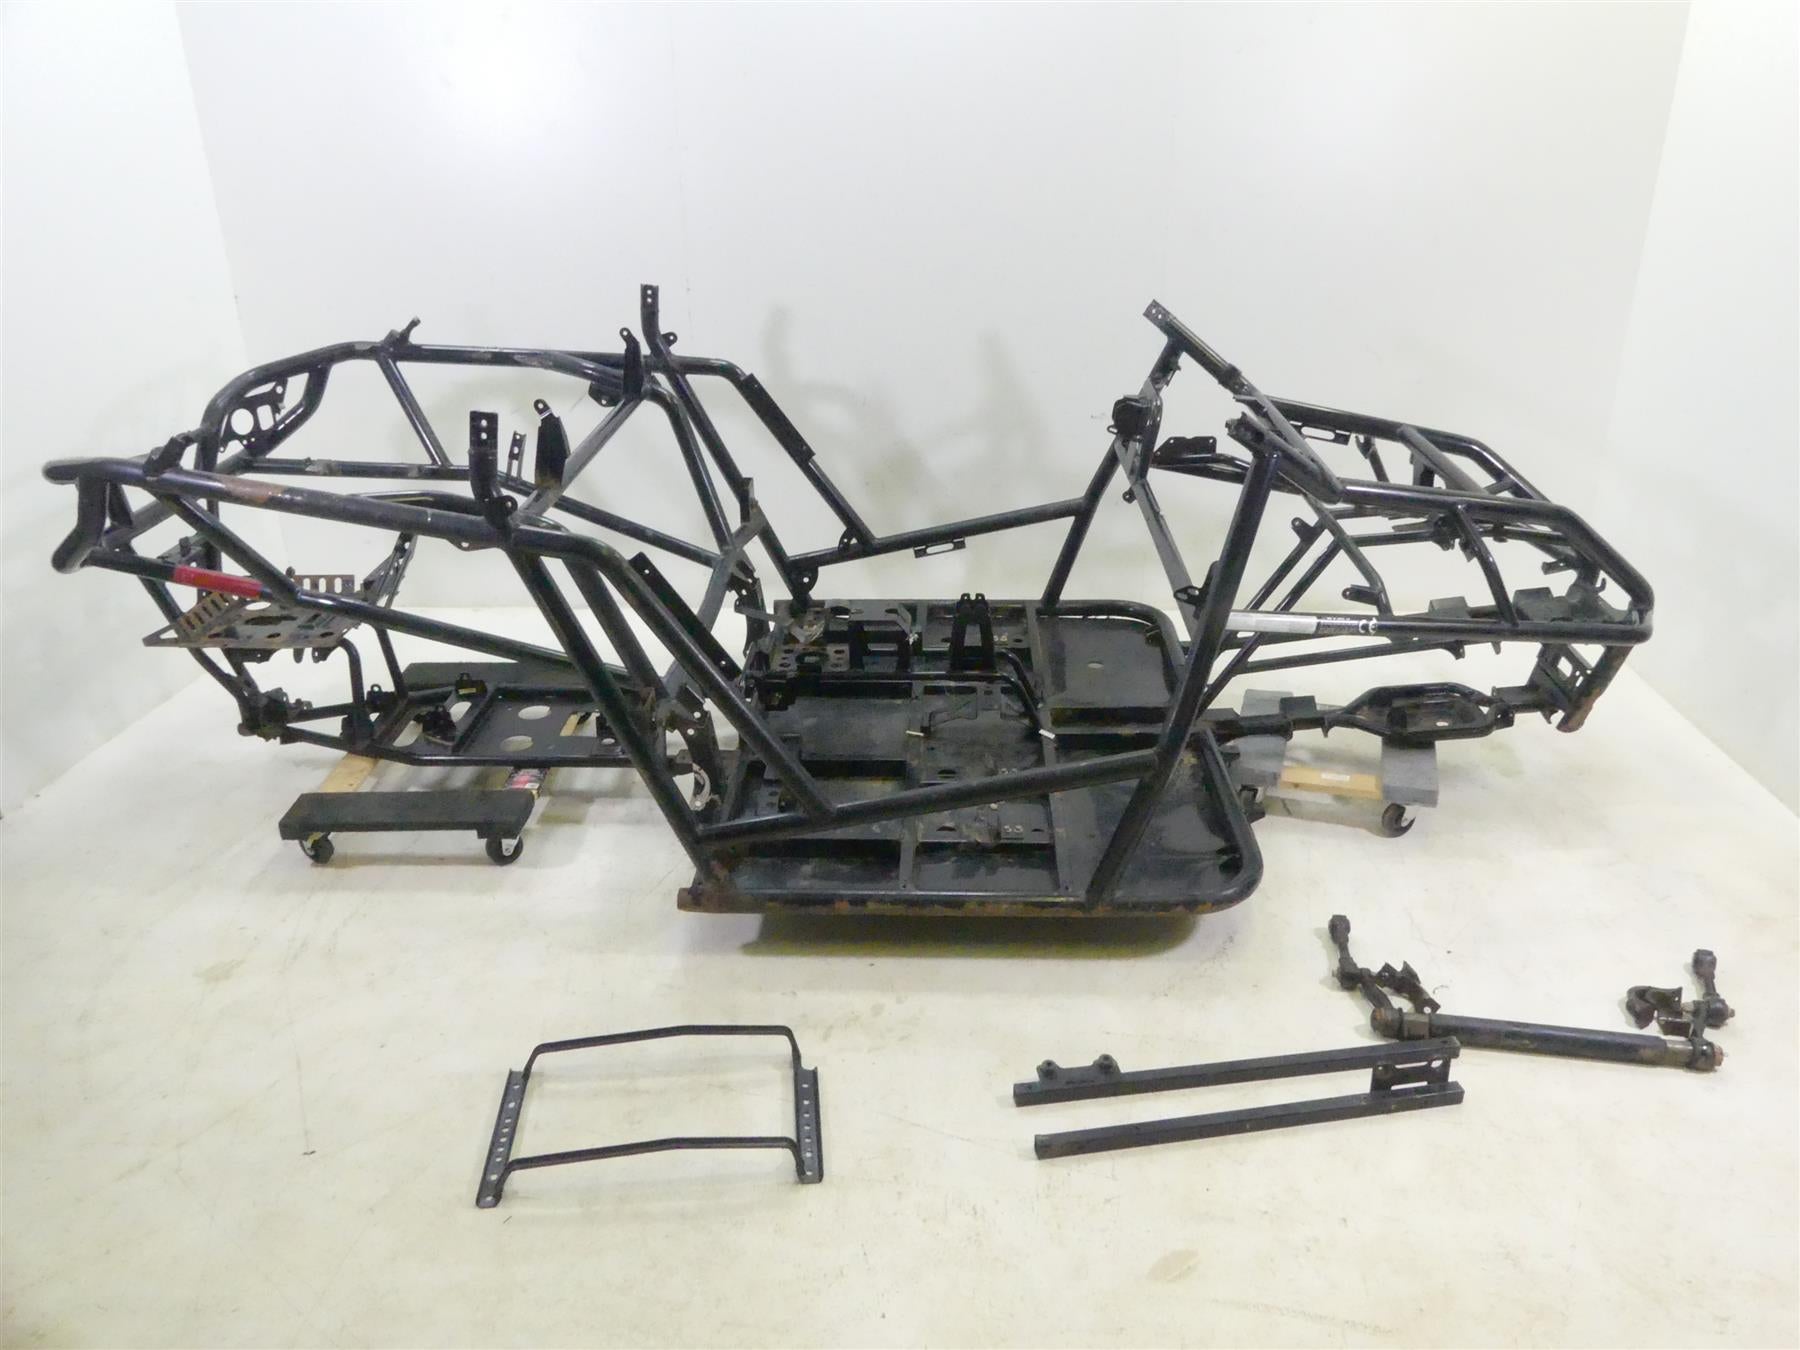 2013 Arctic Cat Wildcat 1000 LTD Main Frame Chassis With Kentucky Clean Title - Read 5506-118 | Mototech271